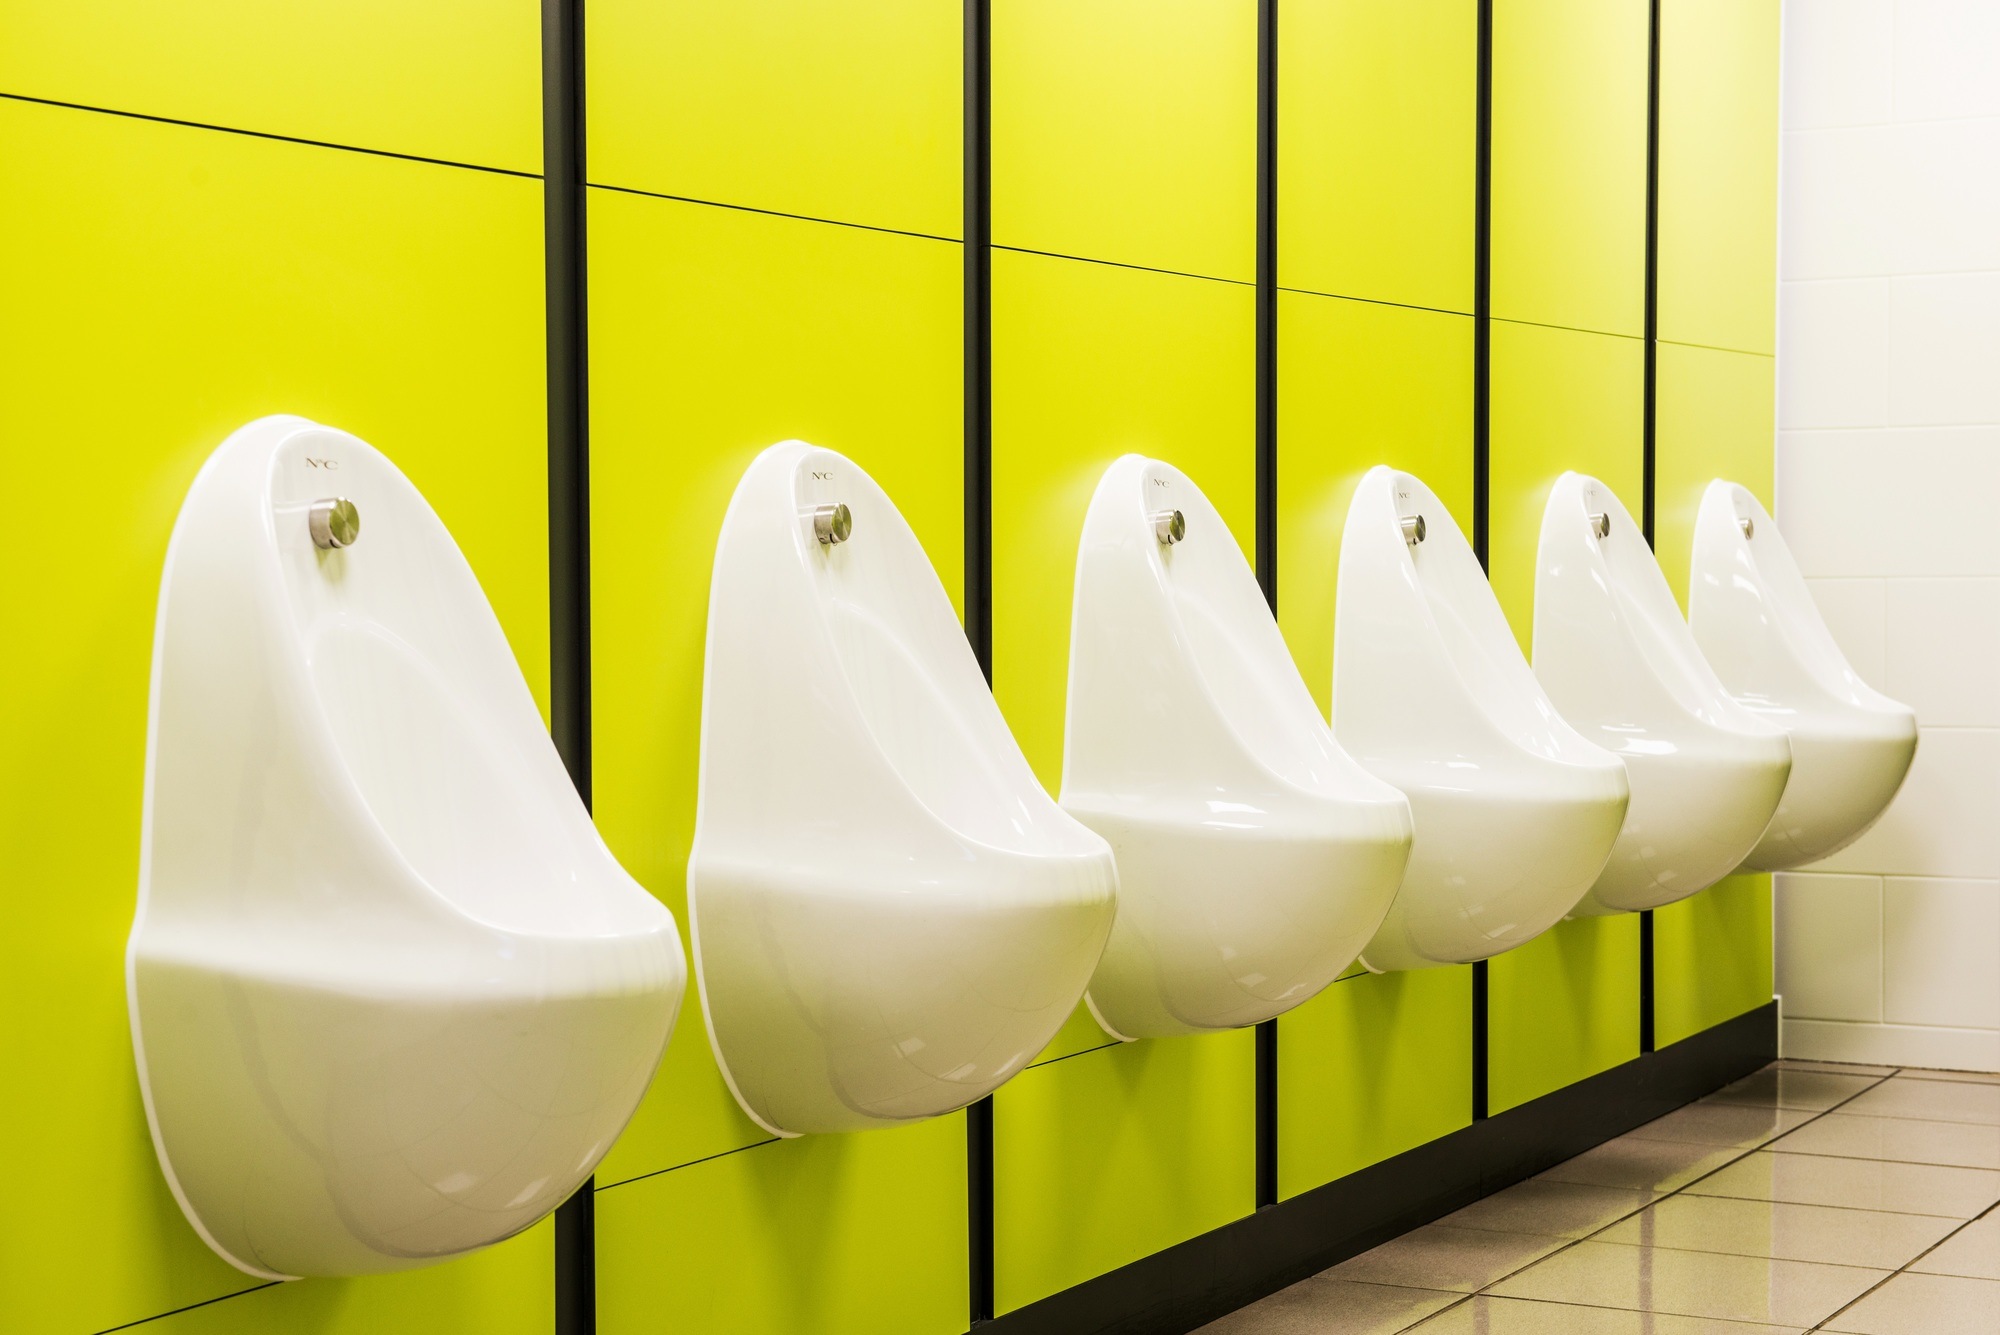 New urinals inside a theme park toilet room.